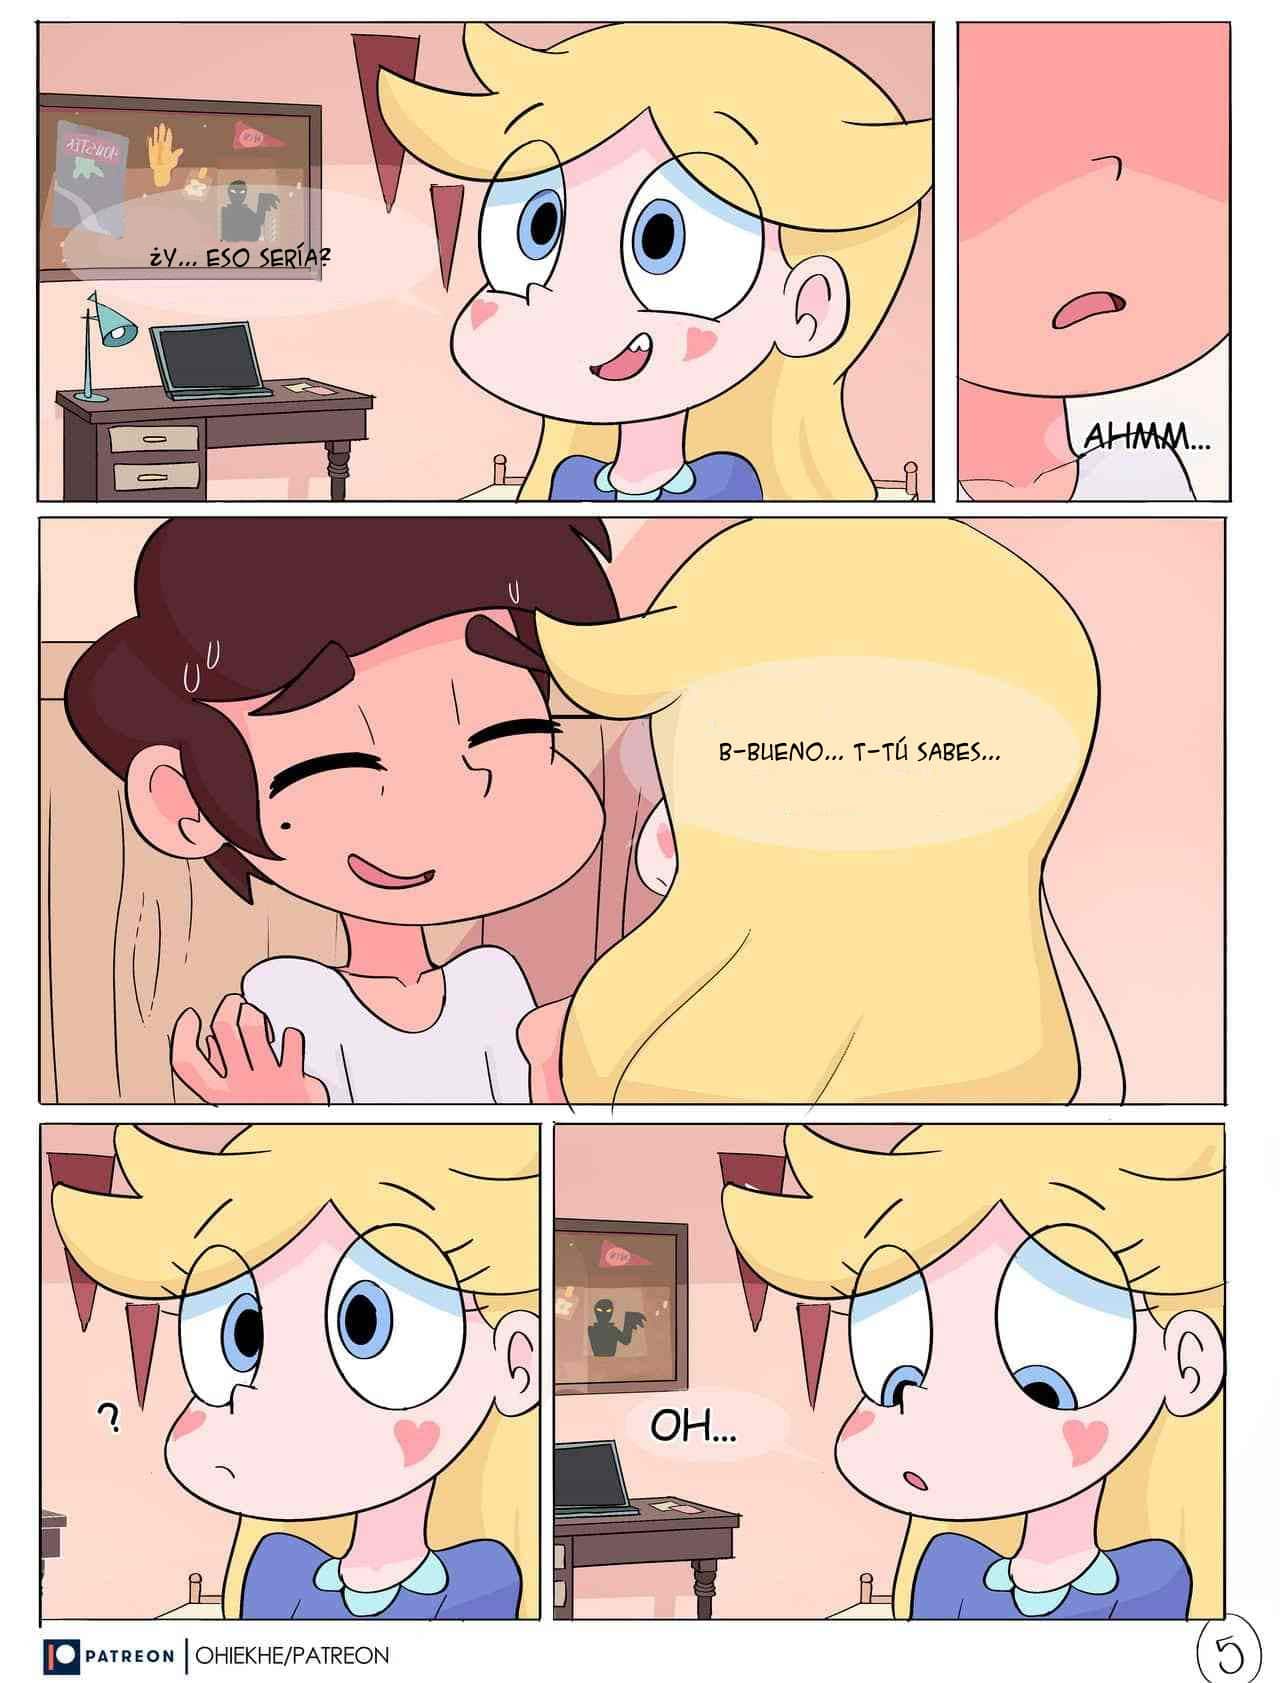 Time Alone – Star vs the Forces of Evil - 5